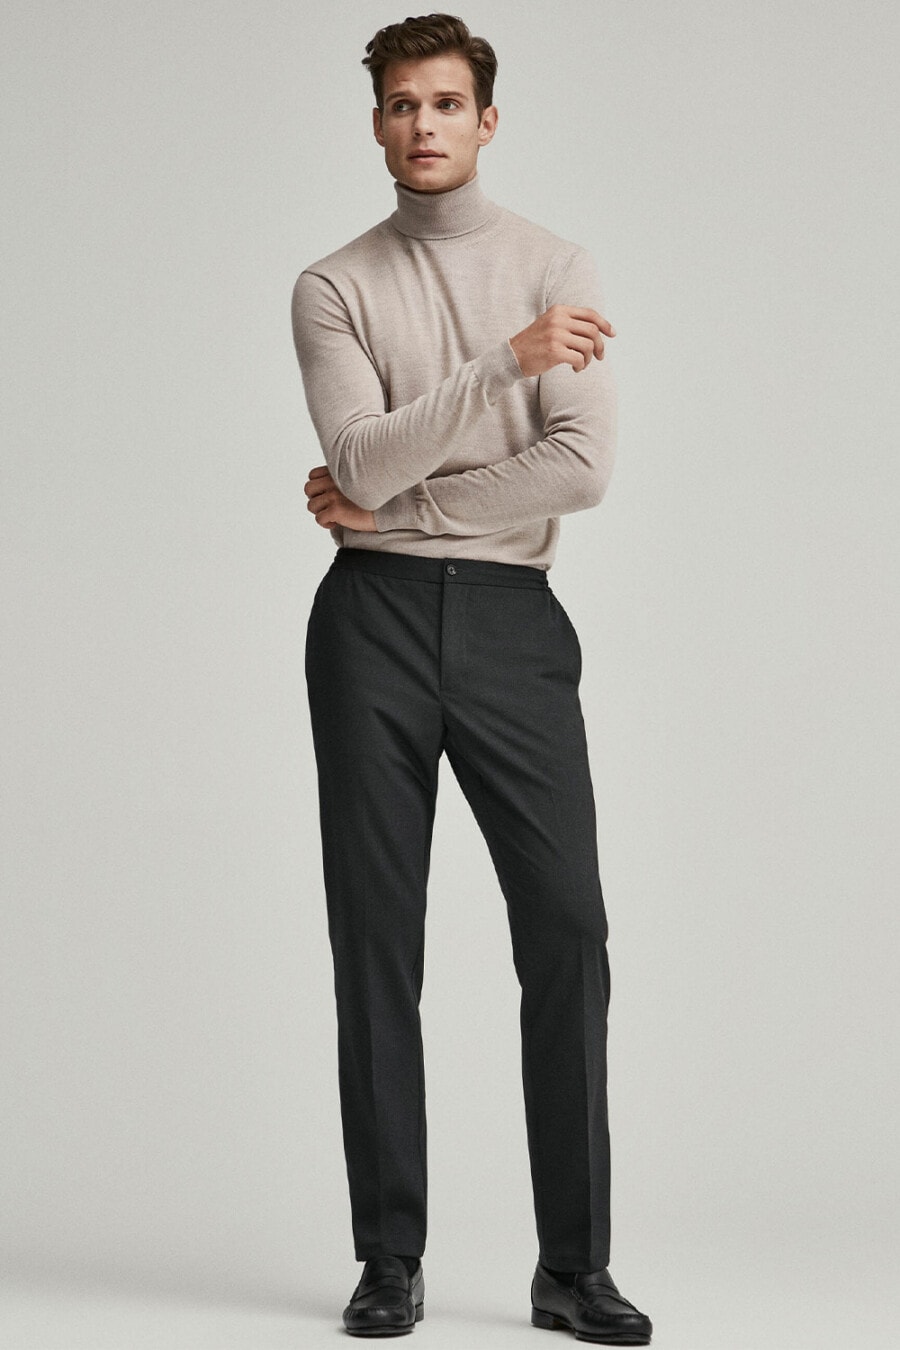 Men's charcoal tailored pants, stone tucked in turtleneck, black socks and black leather penny loafers business casual outfit